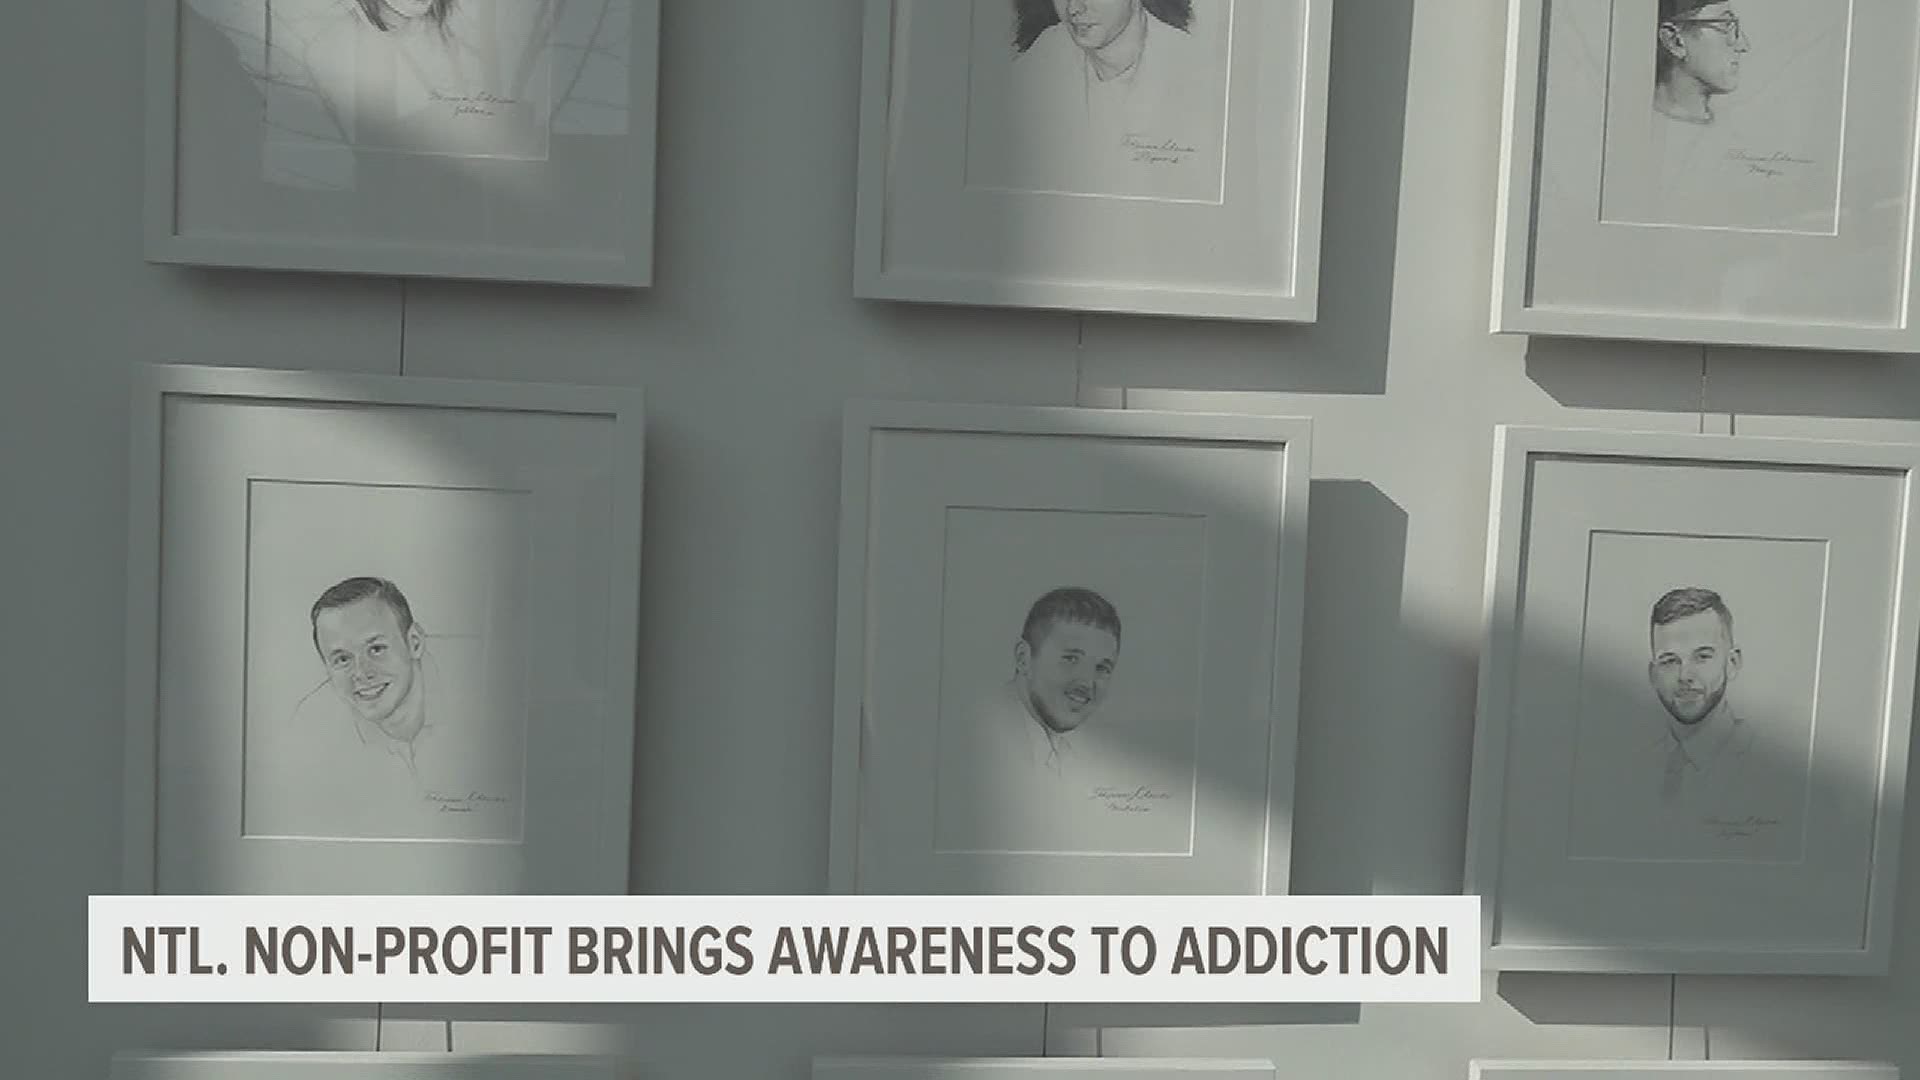 The national non-profit "INTO LIGHT," will be displaying an exhibit of 32 portraits in downtown Lancaster to bring awareness to addiction and erase its stigma.